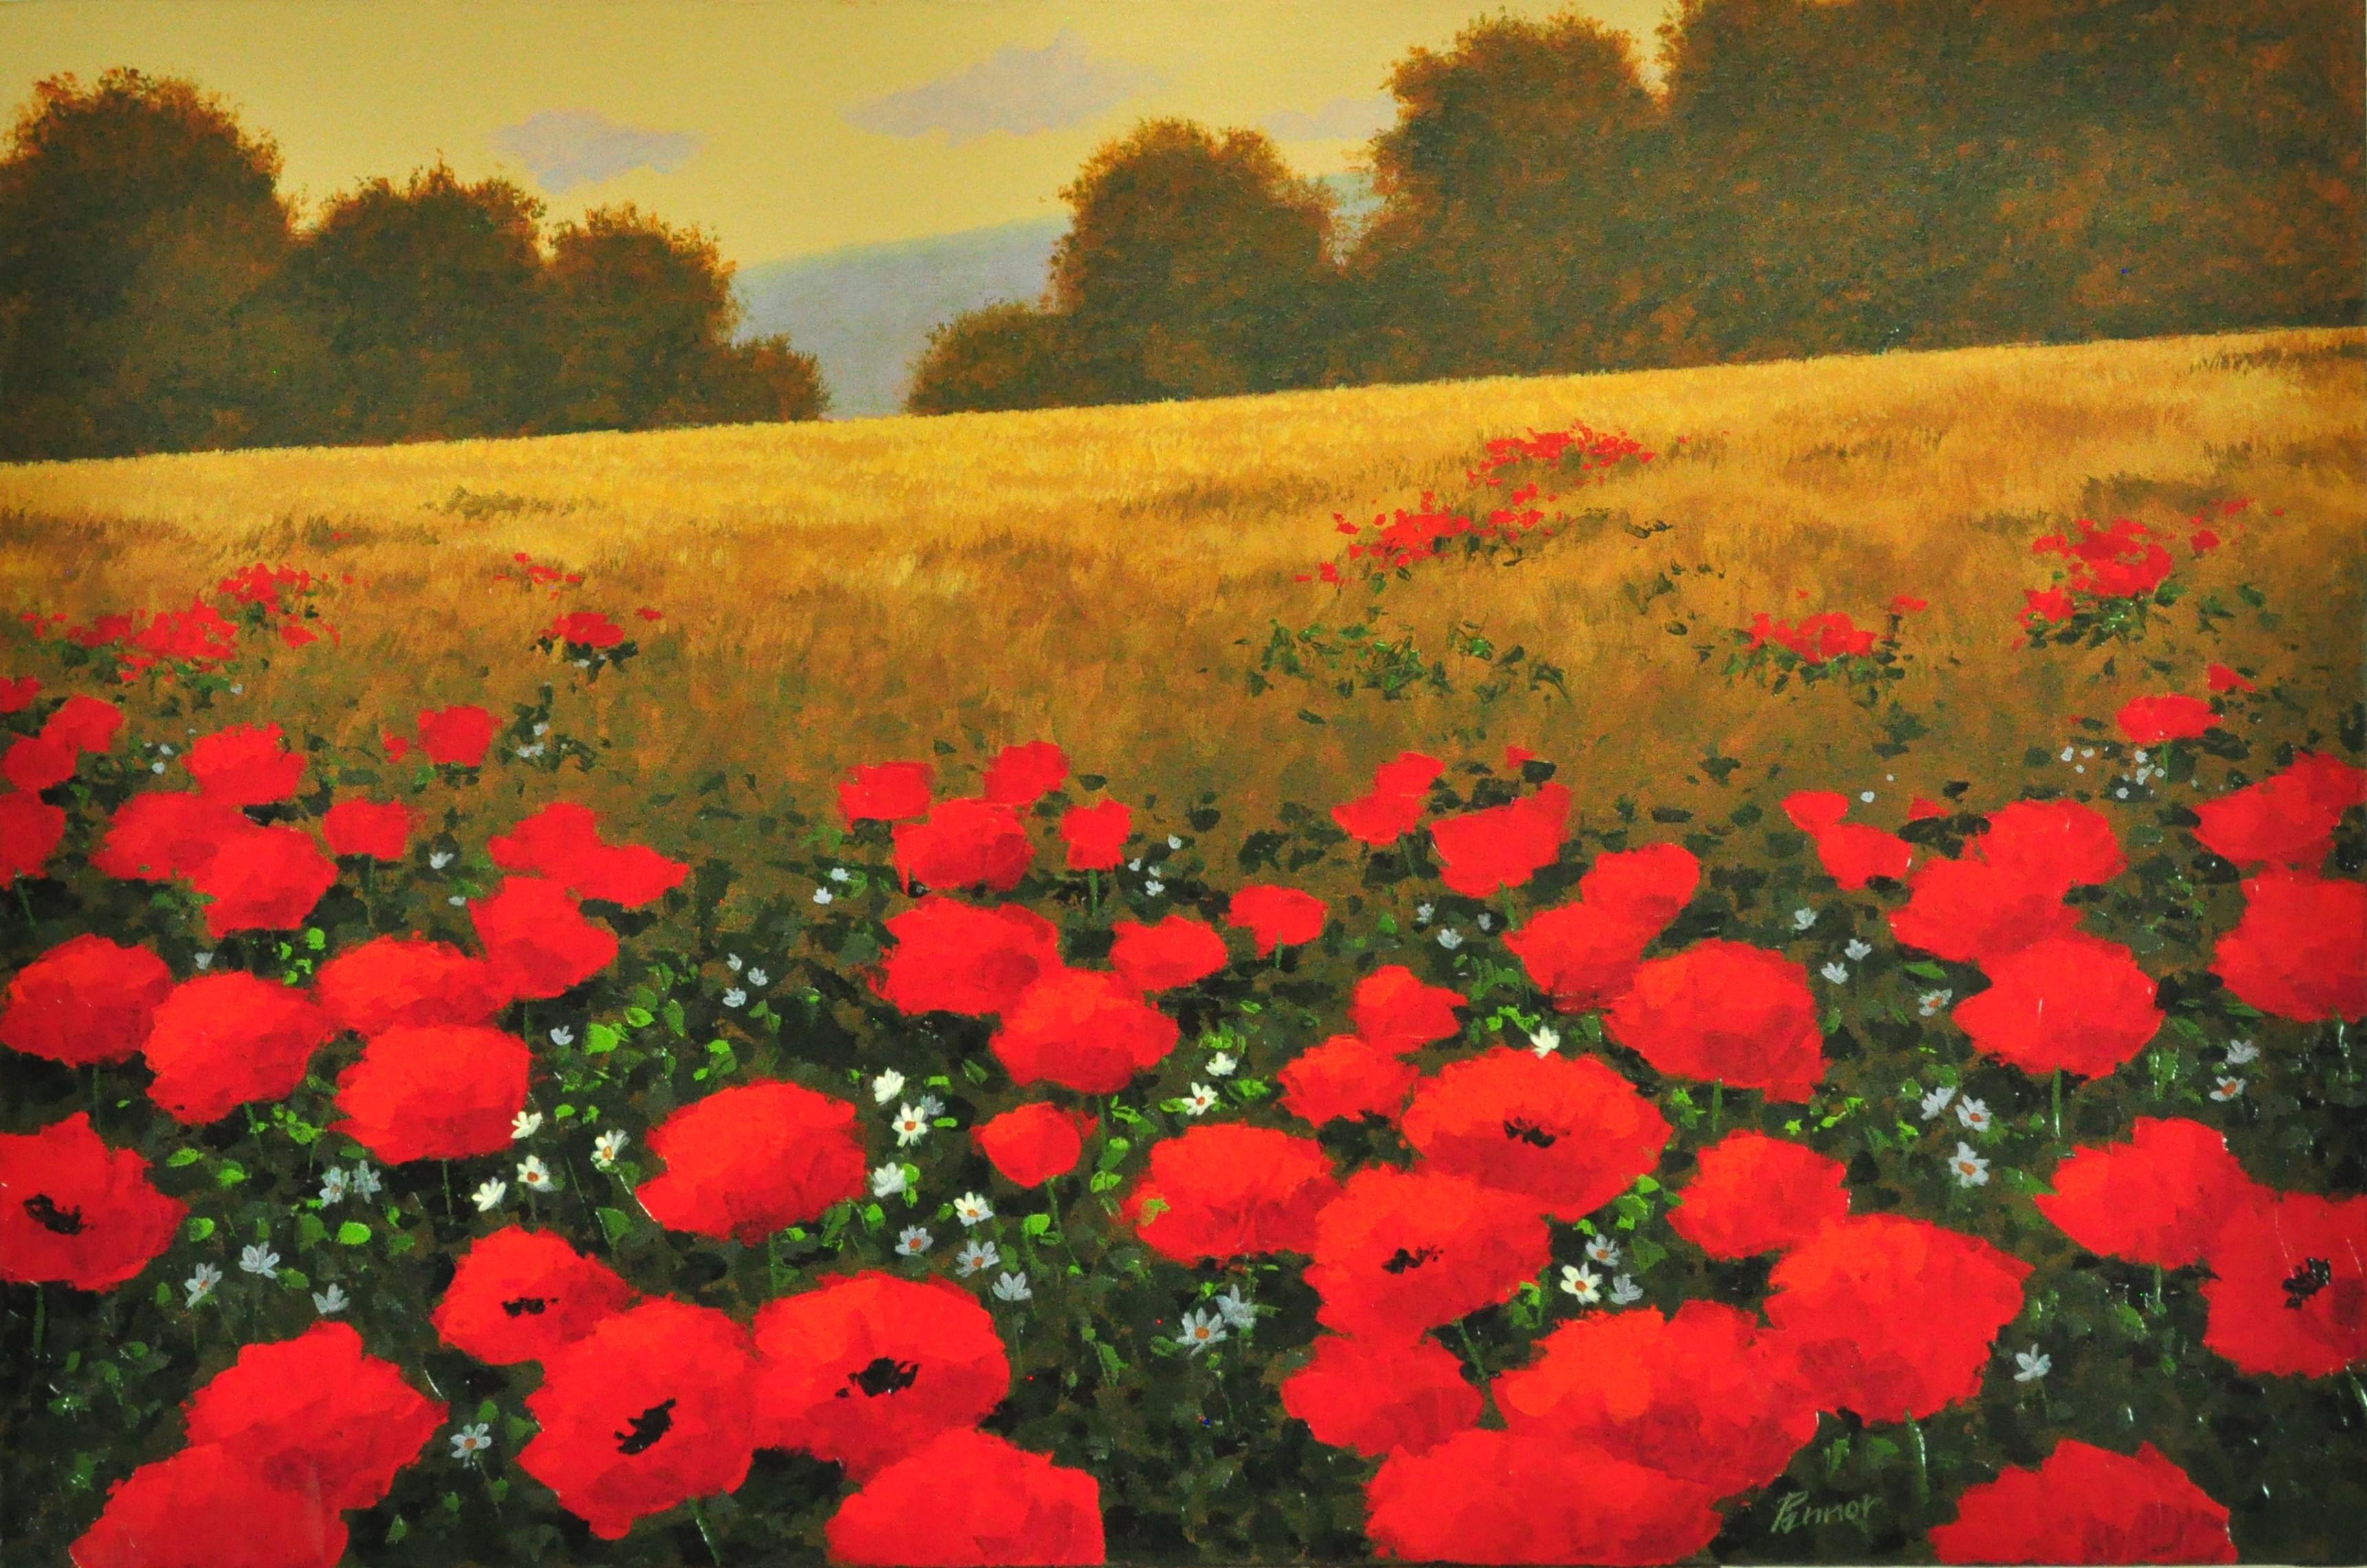 Robert Pennor Landscape Painting - Red Poppies in a Field, Original Painting